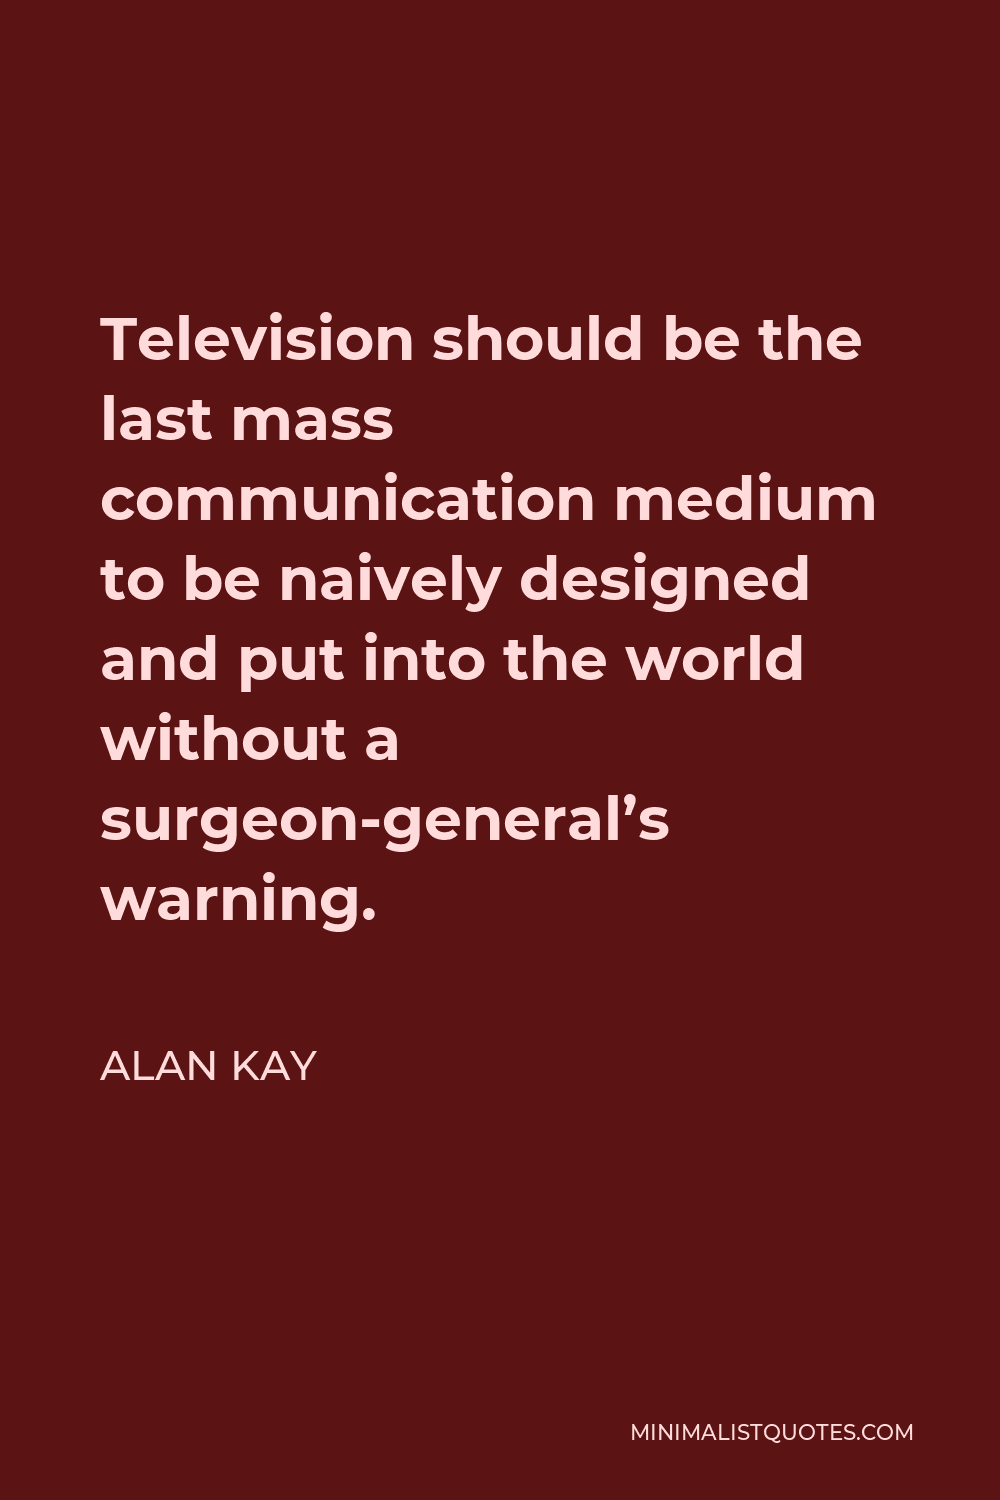 Alan Kay Quote - Television should be the last mass communication medium to be naively designed and put into the world without a surgeon-general’s warning.